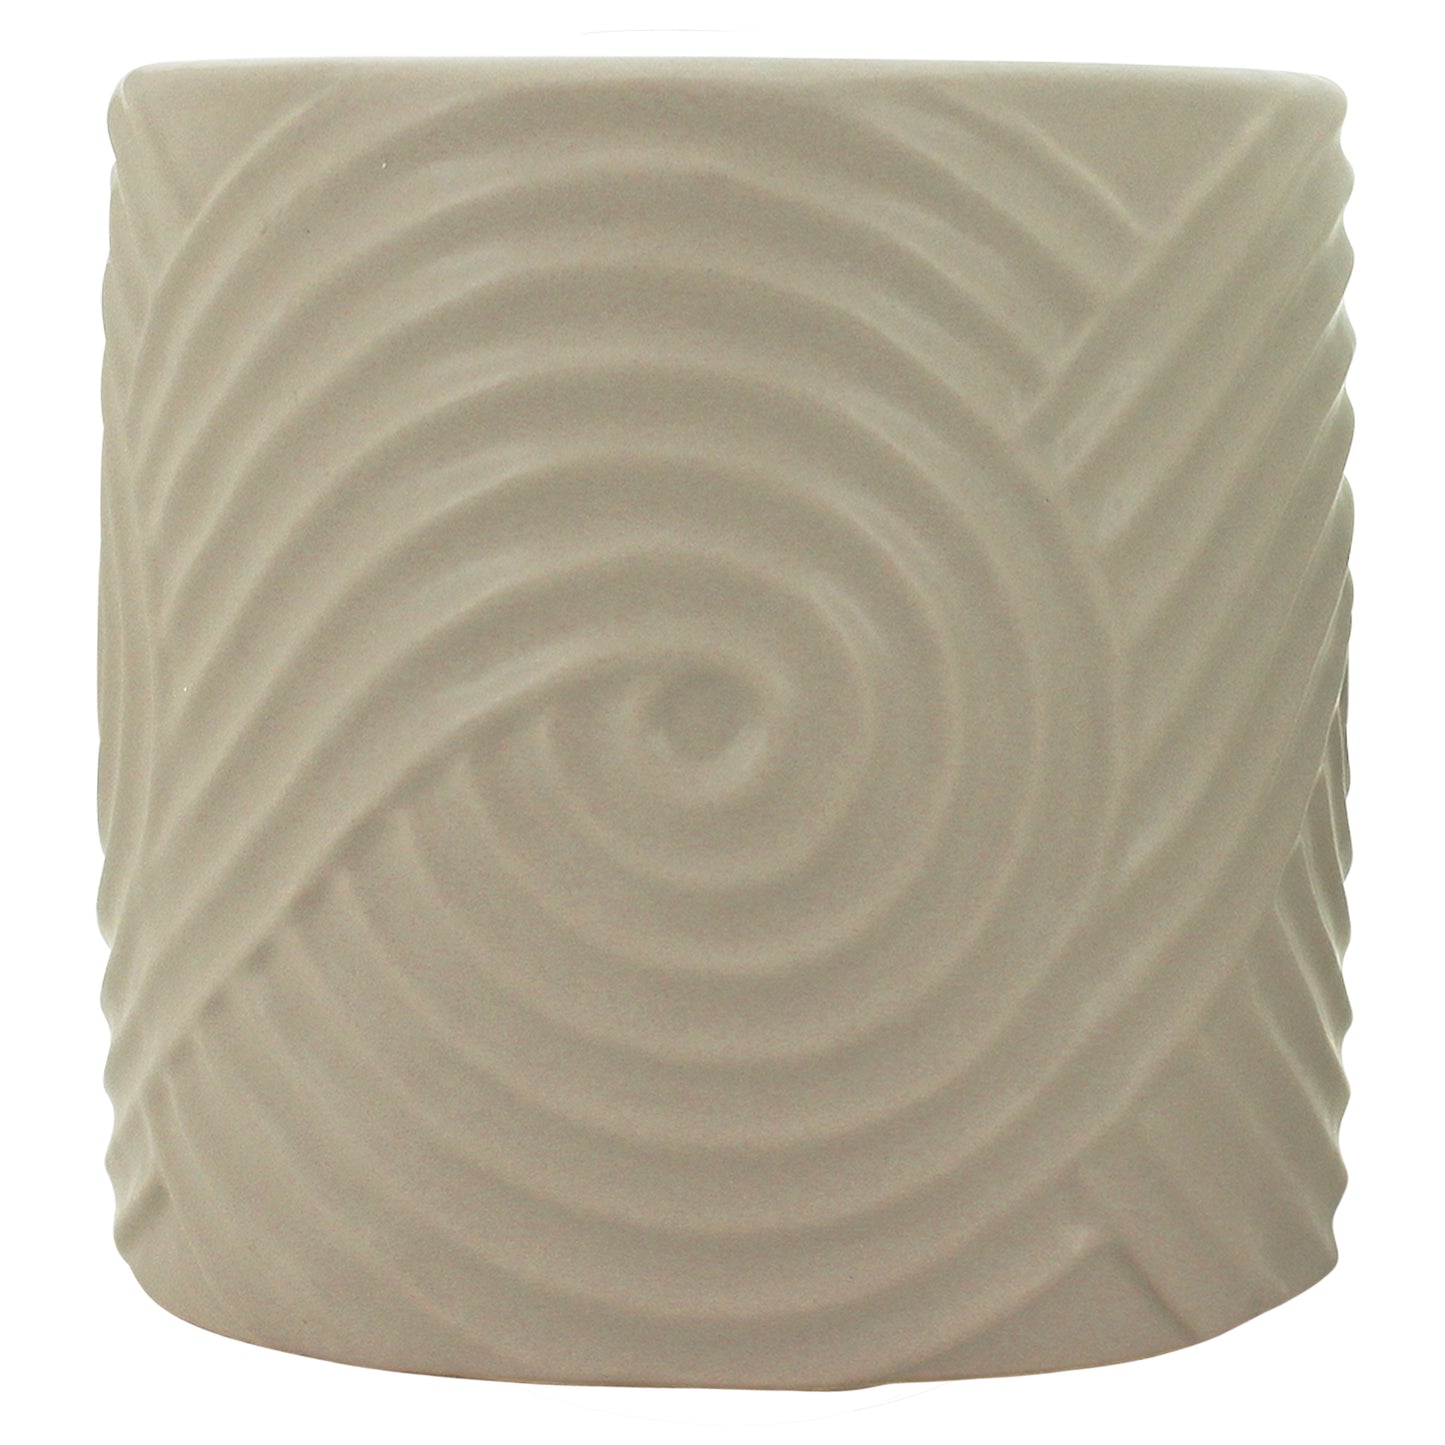 NF "Swirling" Planter Pot Taupe 17x17cm